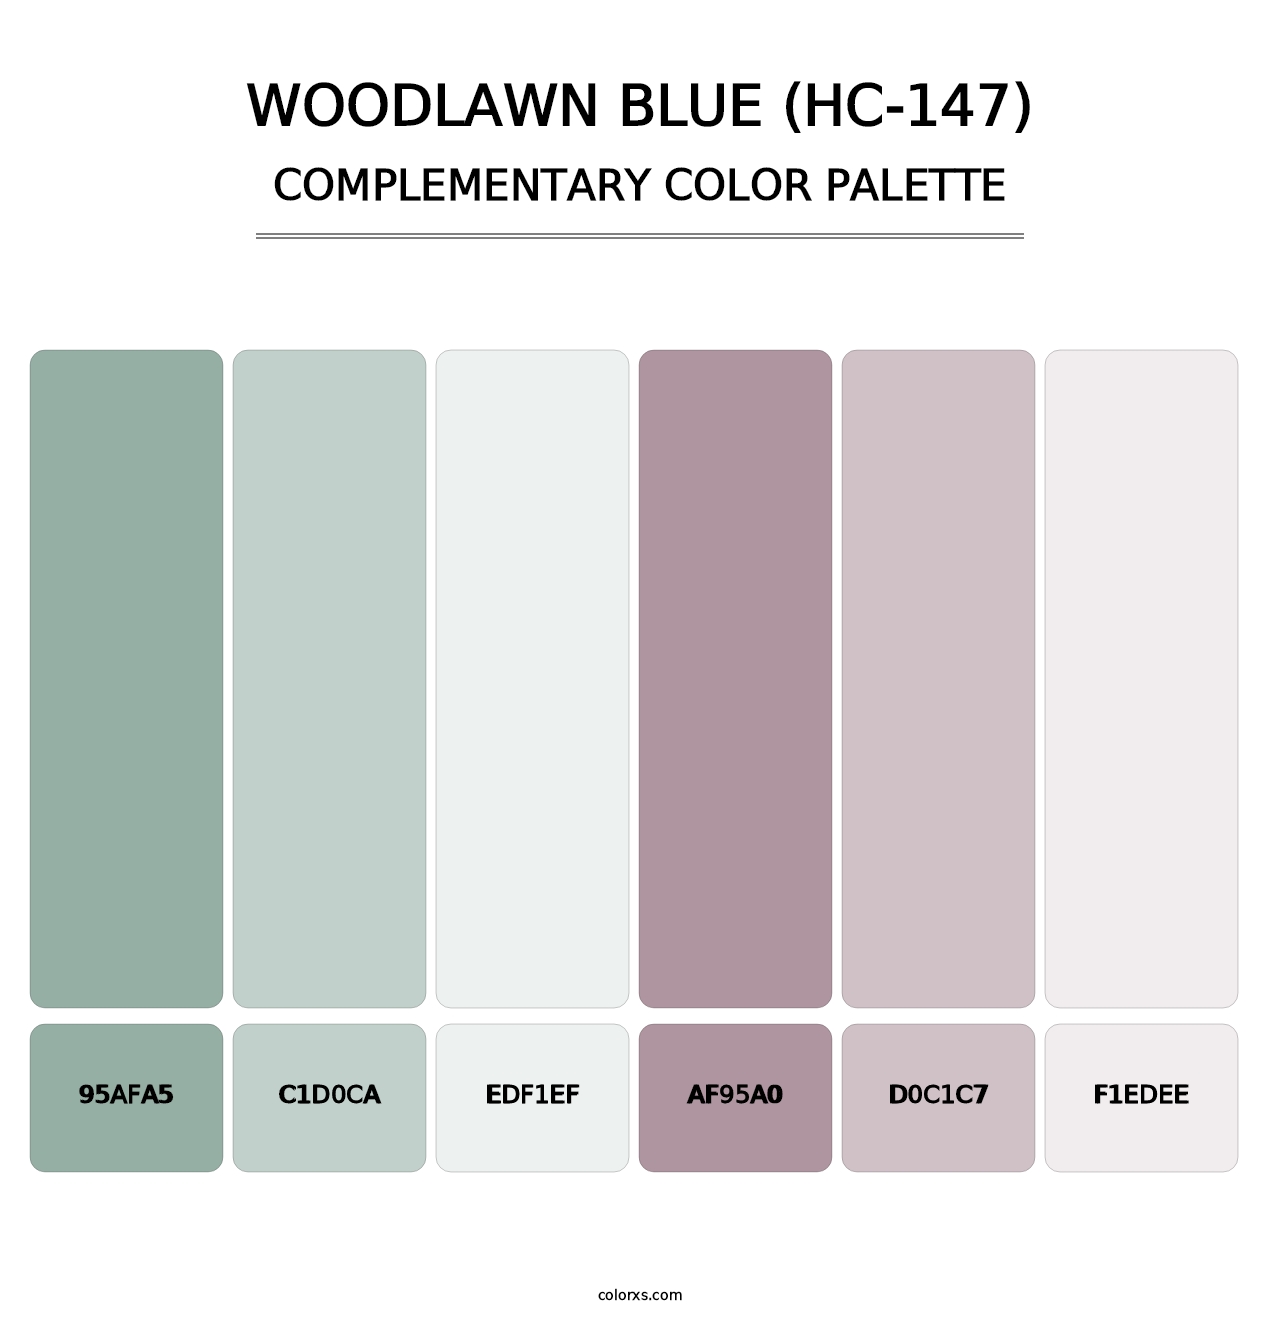 Woodlawn Blue (HC-147) - Complementary Color Palette